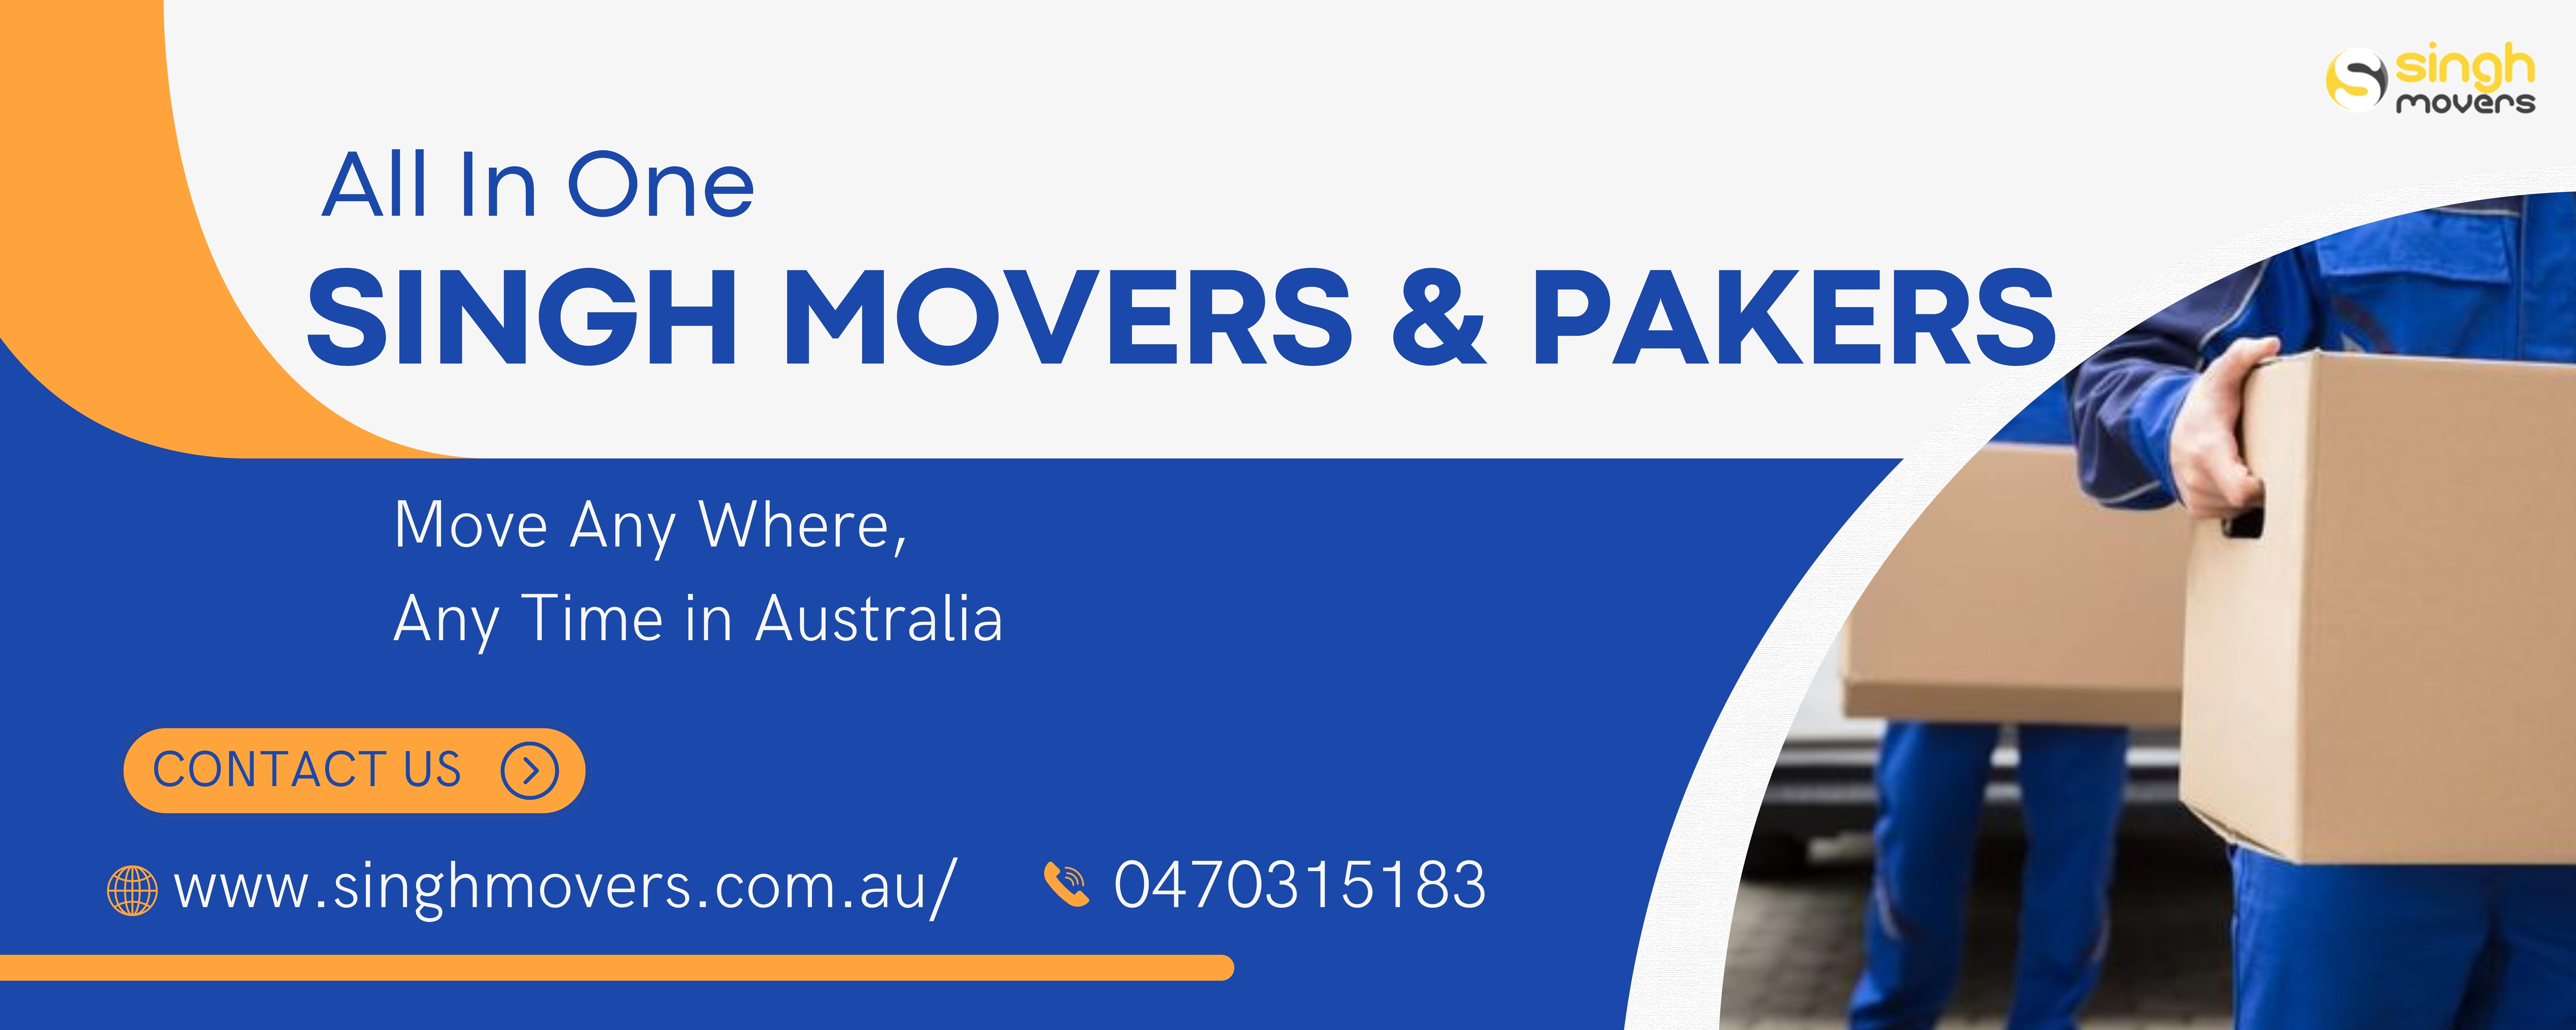 singh movers storage services